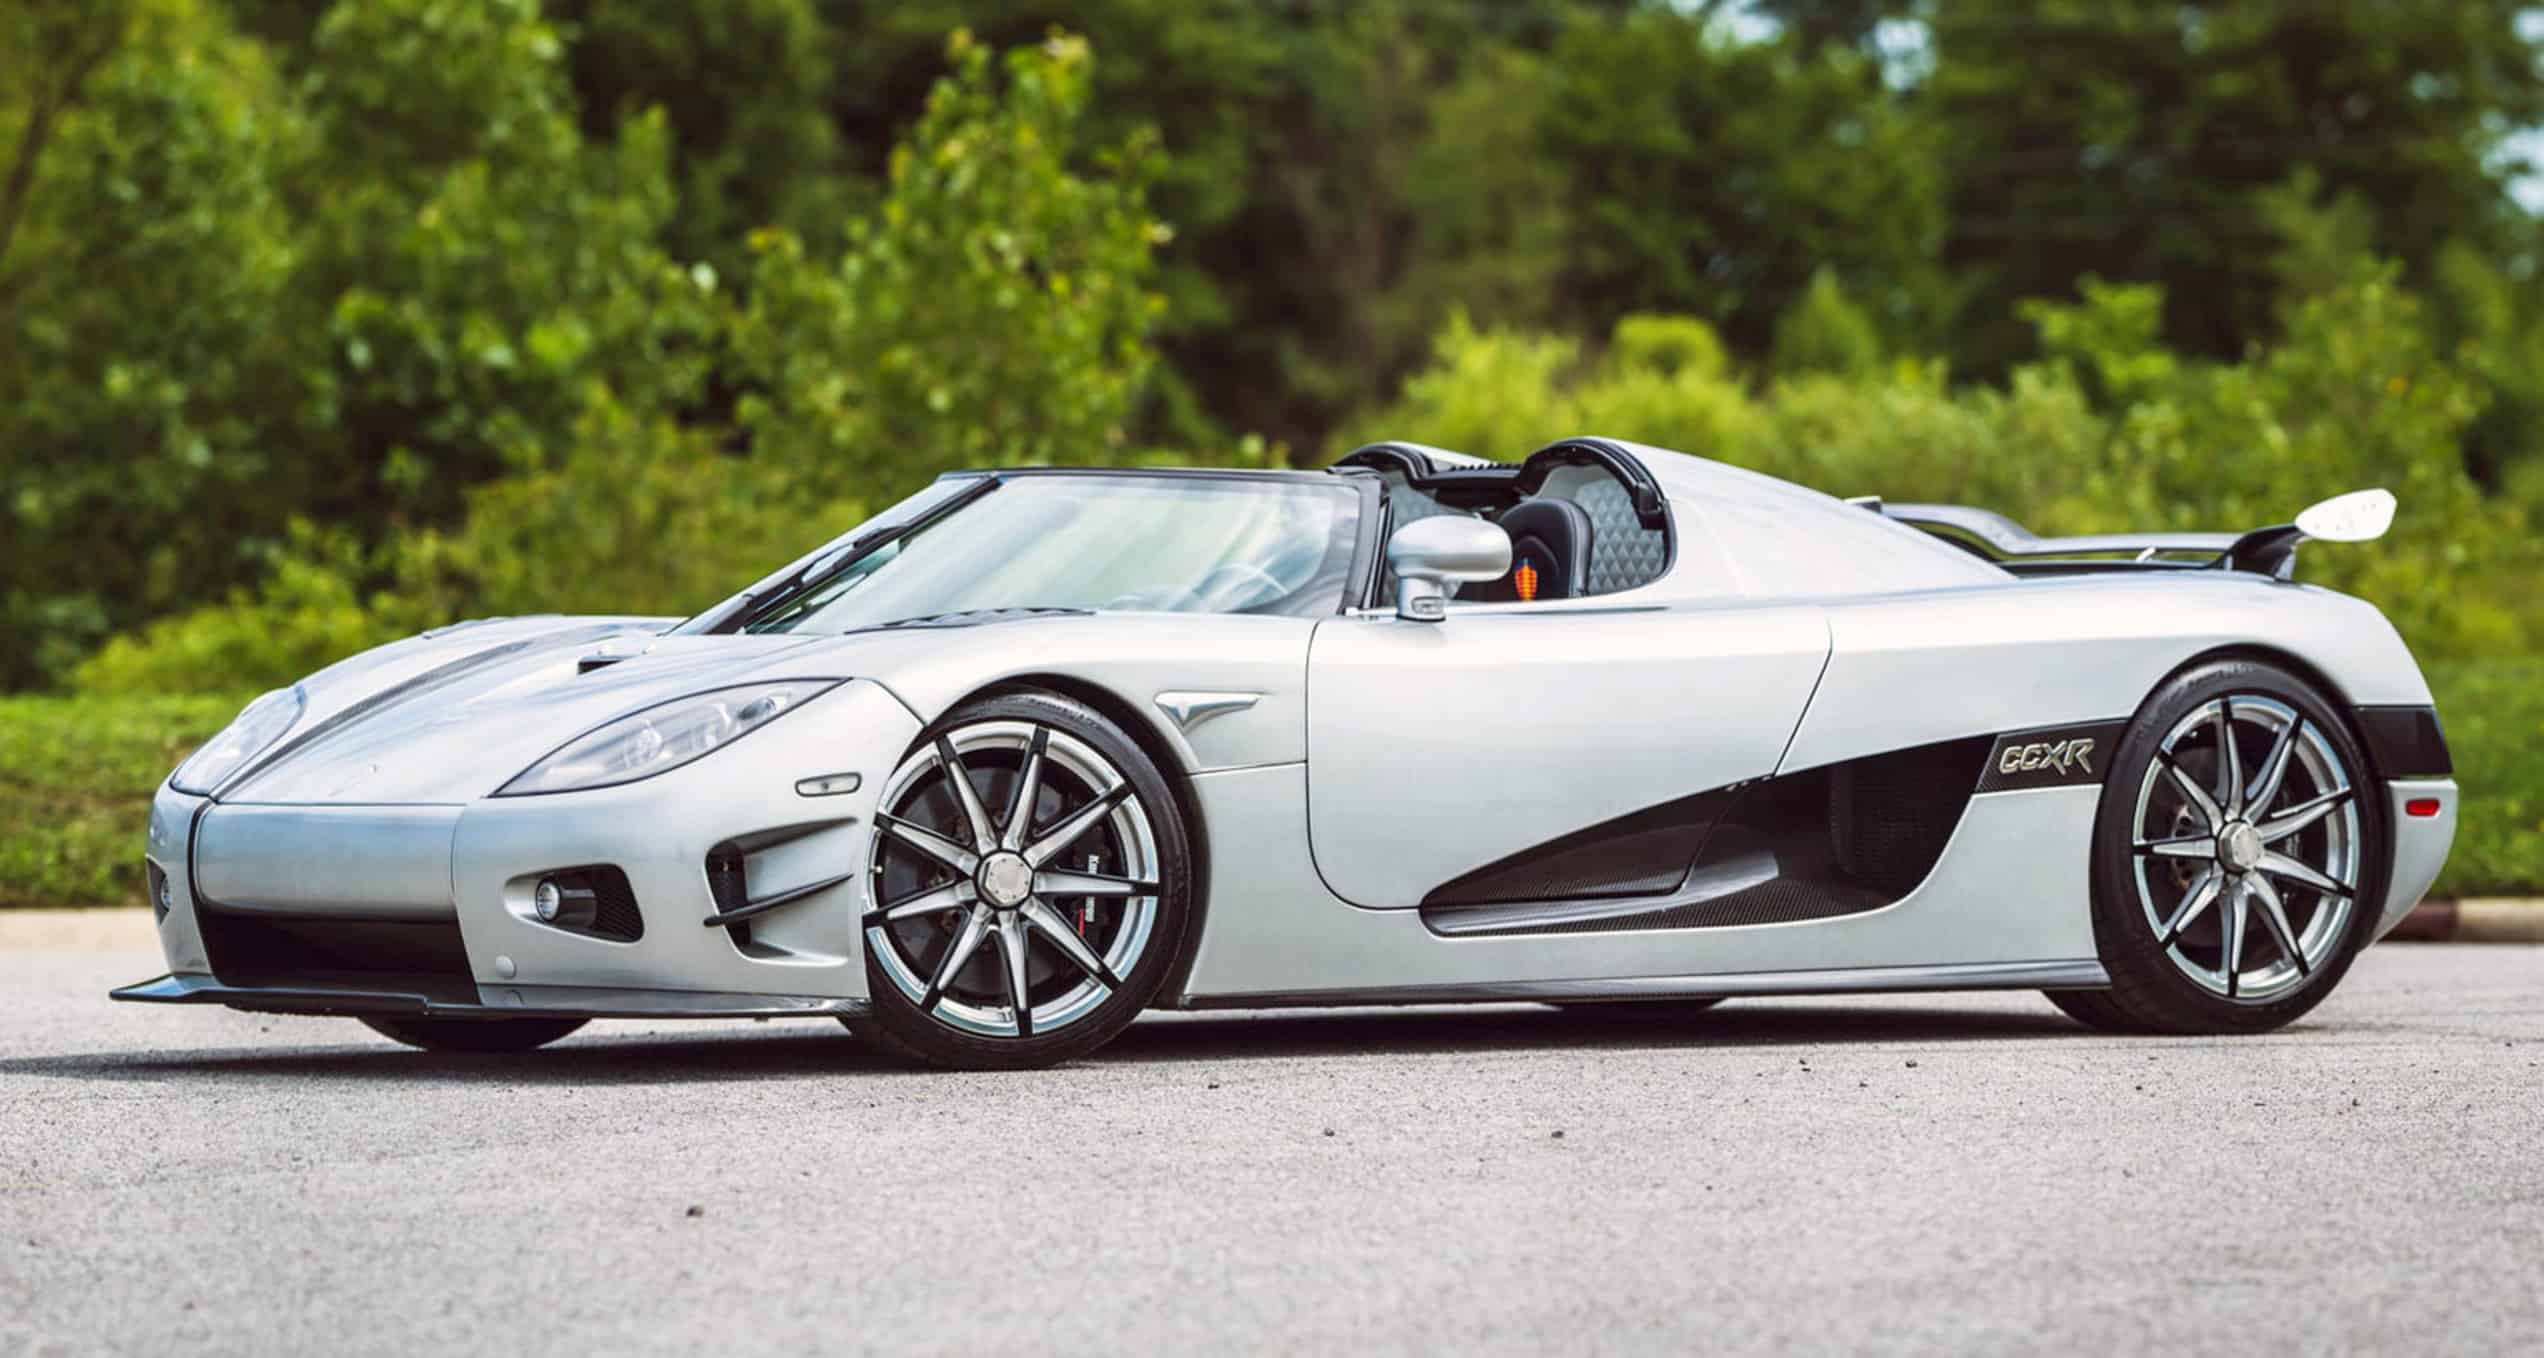 The Top 10 Most Expensive Sports Cars In The World